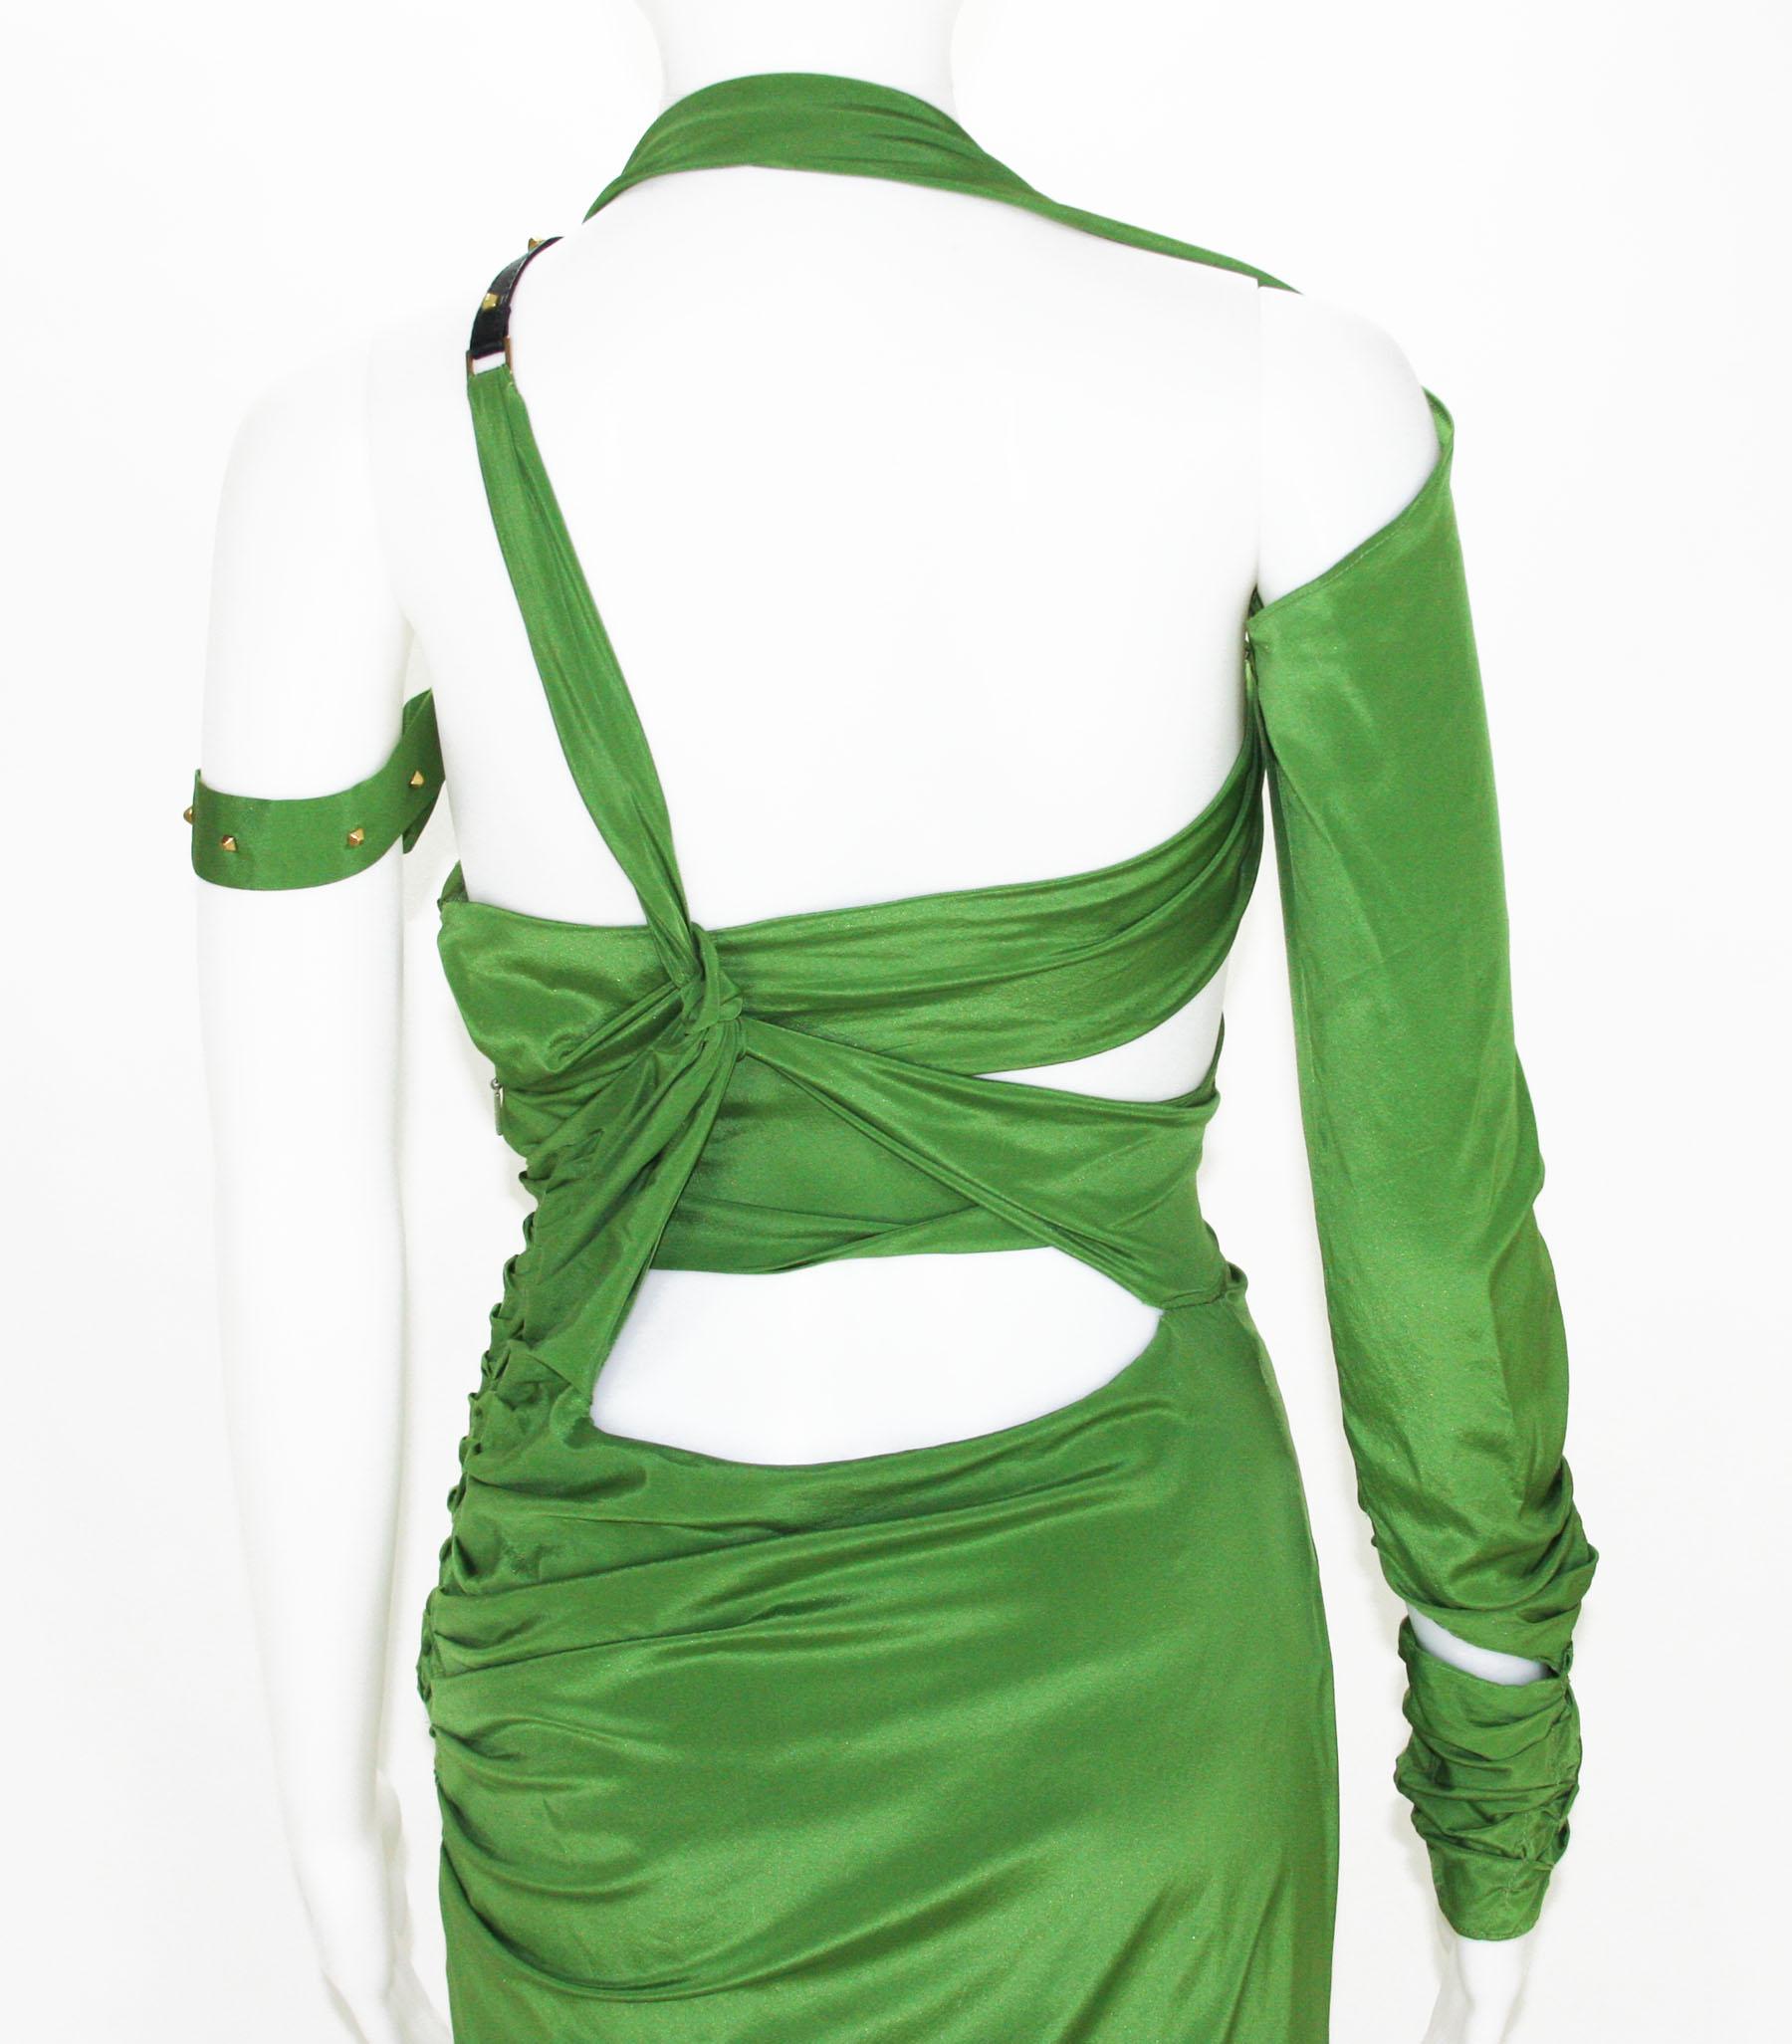 Tom Ford for Gucci 2003 Collection Silk Green Bondage Cut-Out Dress Gown  In Excellent Condition For Sale In Montgomery, TX